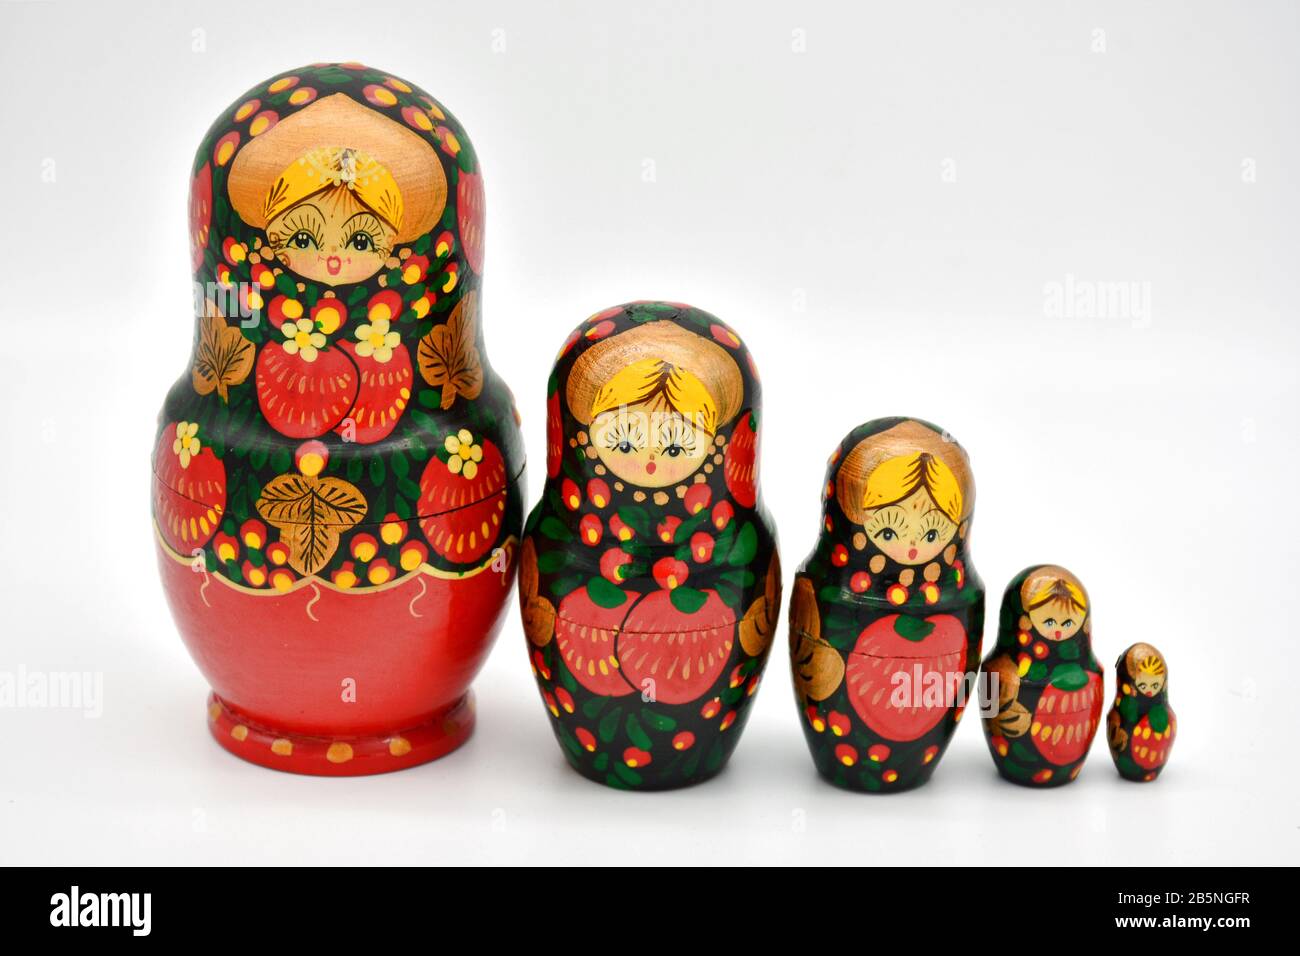 Family of matrioskas dolls, made of wood and hand painted, arranged from highest to lowest Stock Photo